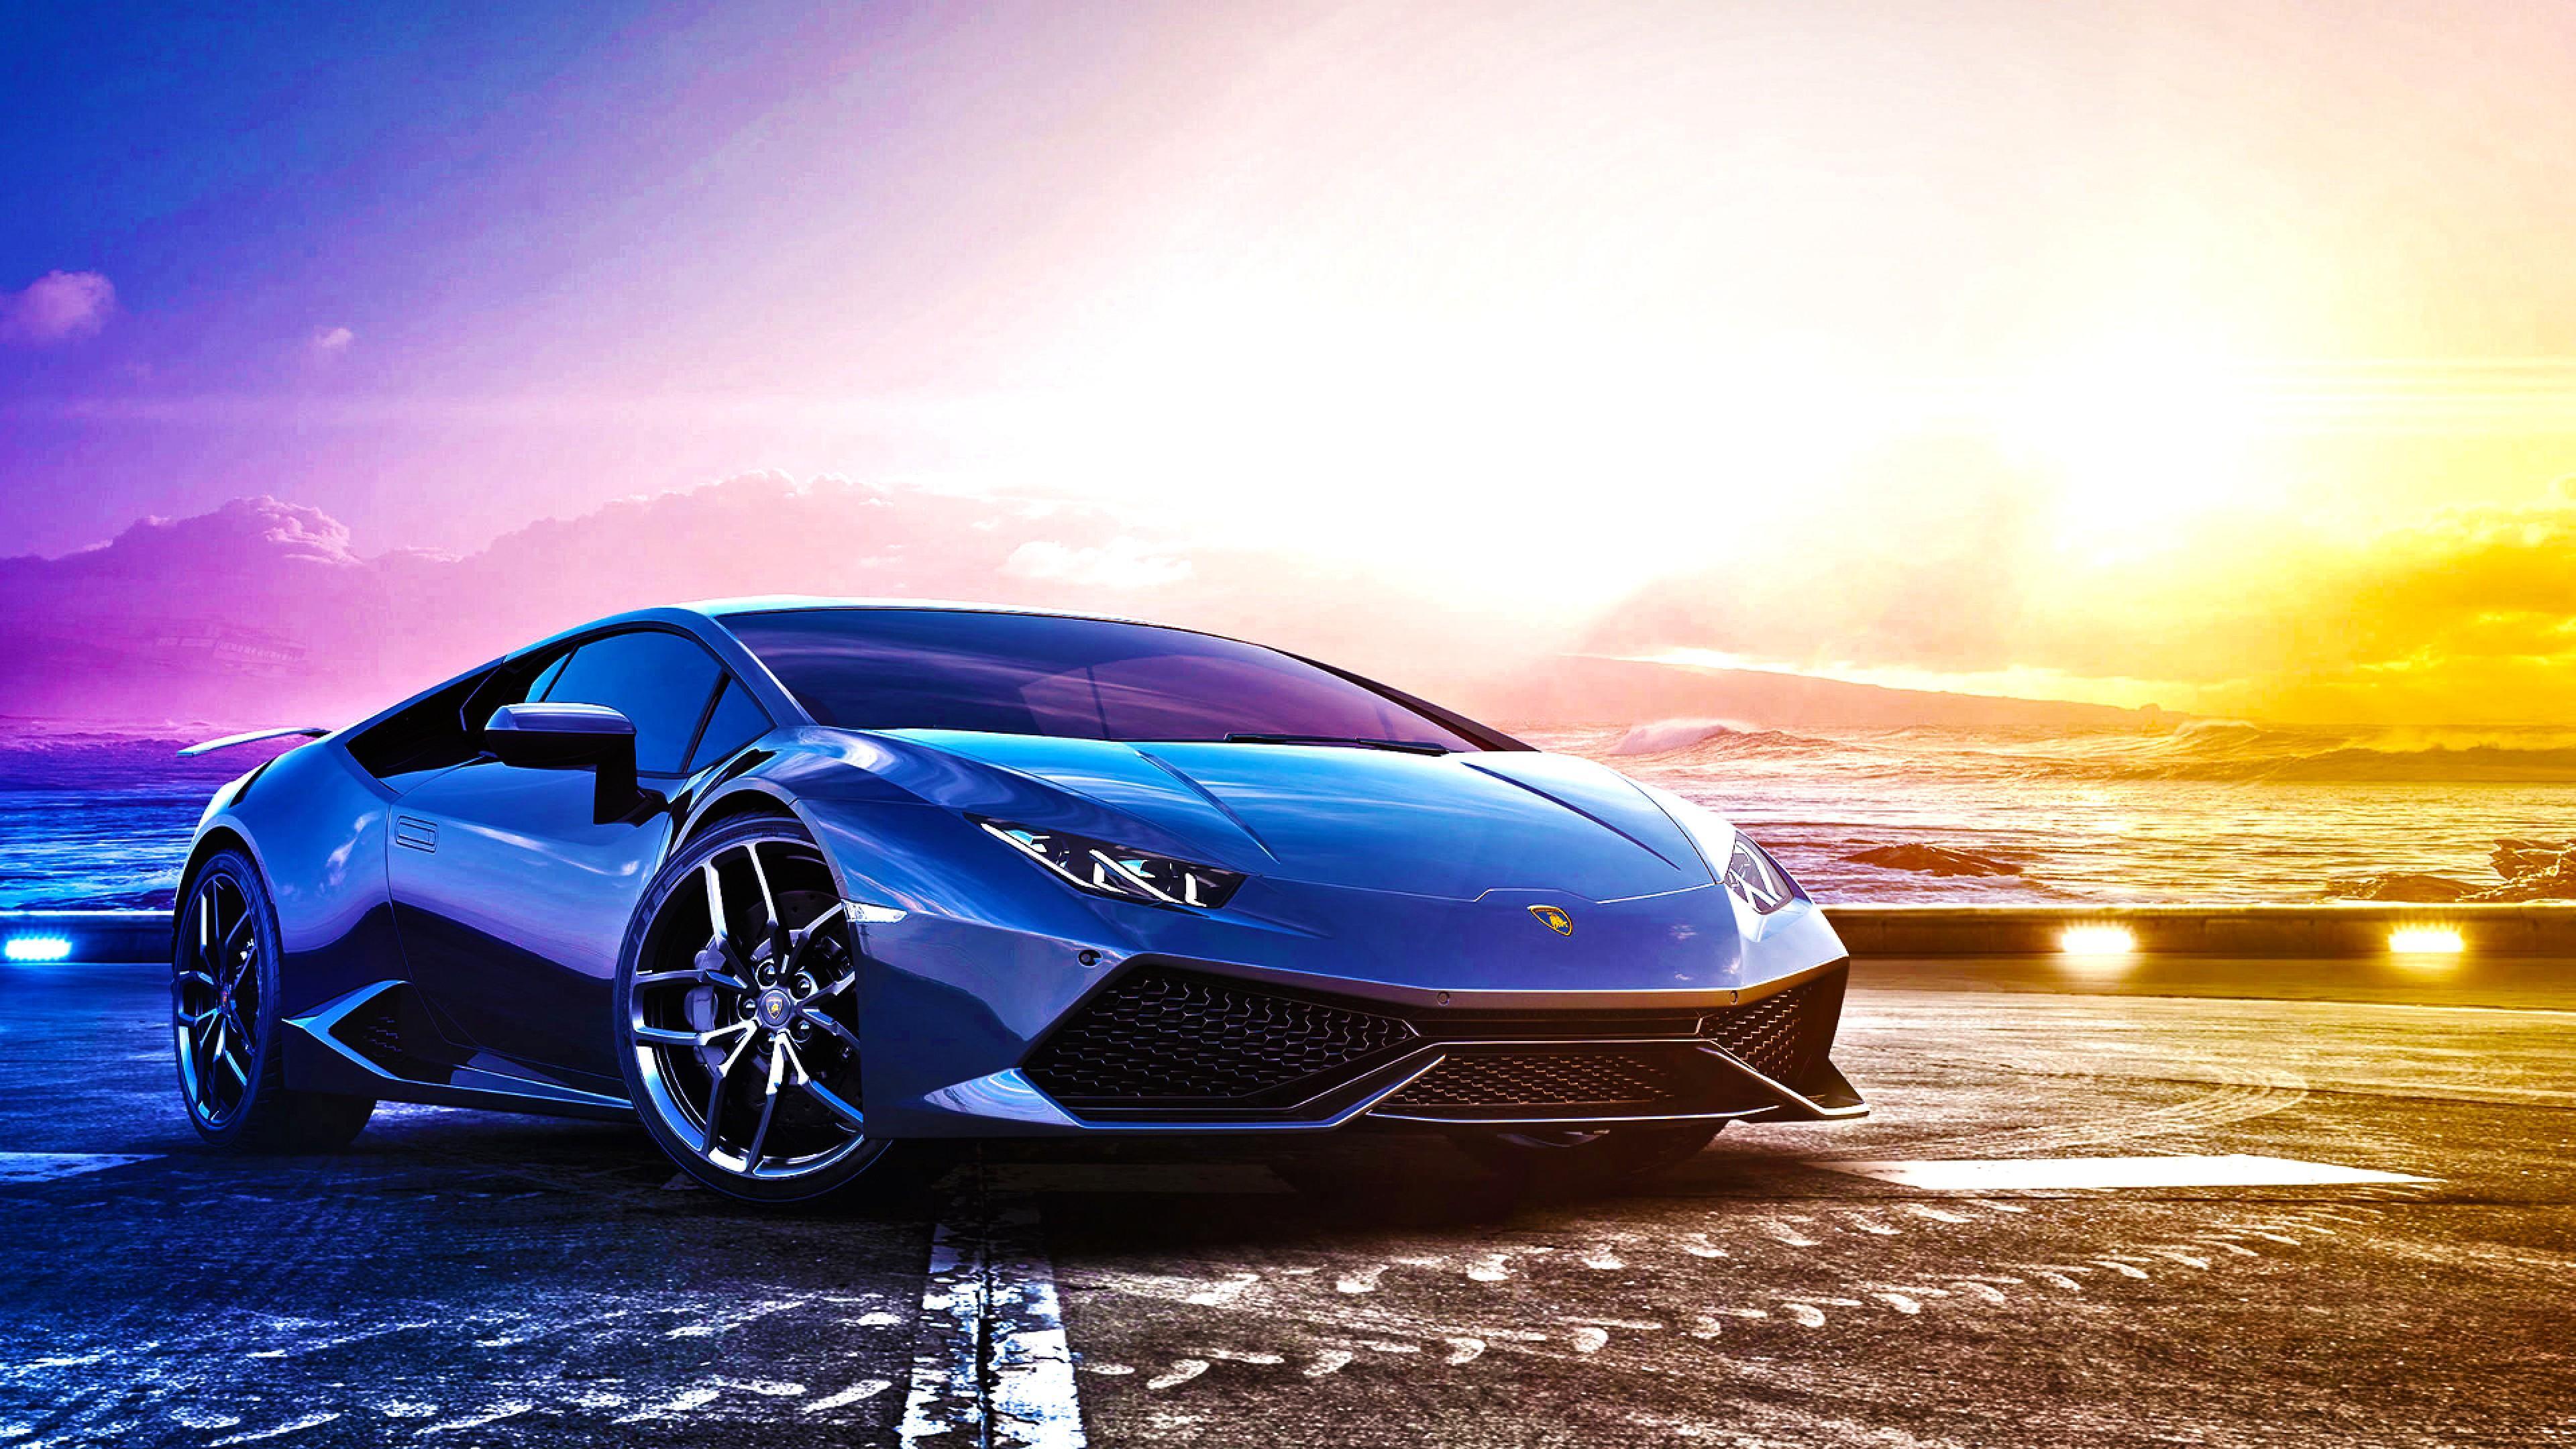 3840x2160 Blue Lamborghini Aventador 4k Hd 4k Wallpapers Images Backgrounds Photos And Pictures